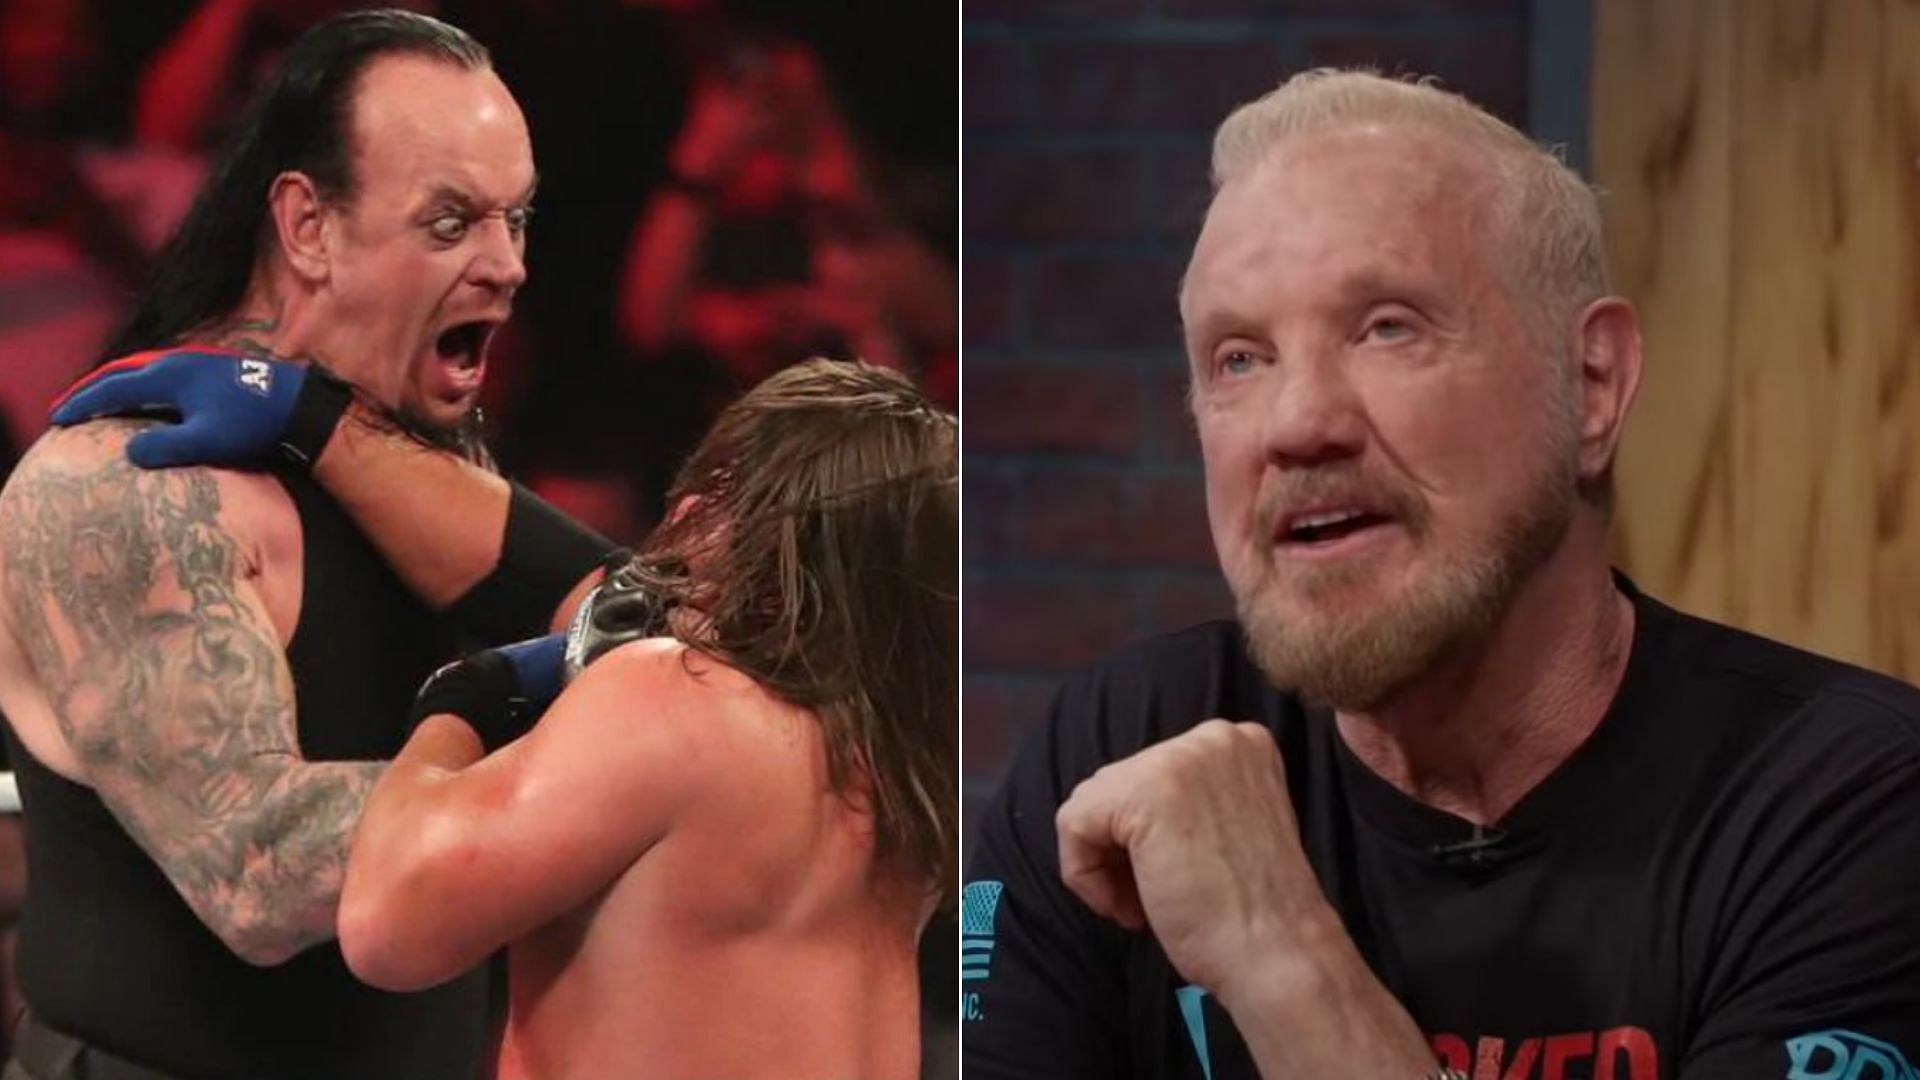 DDP was full of praise for The Undertaker and another legend